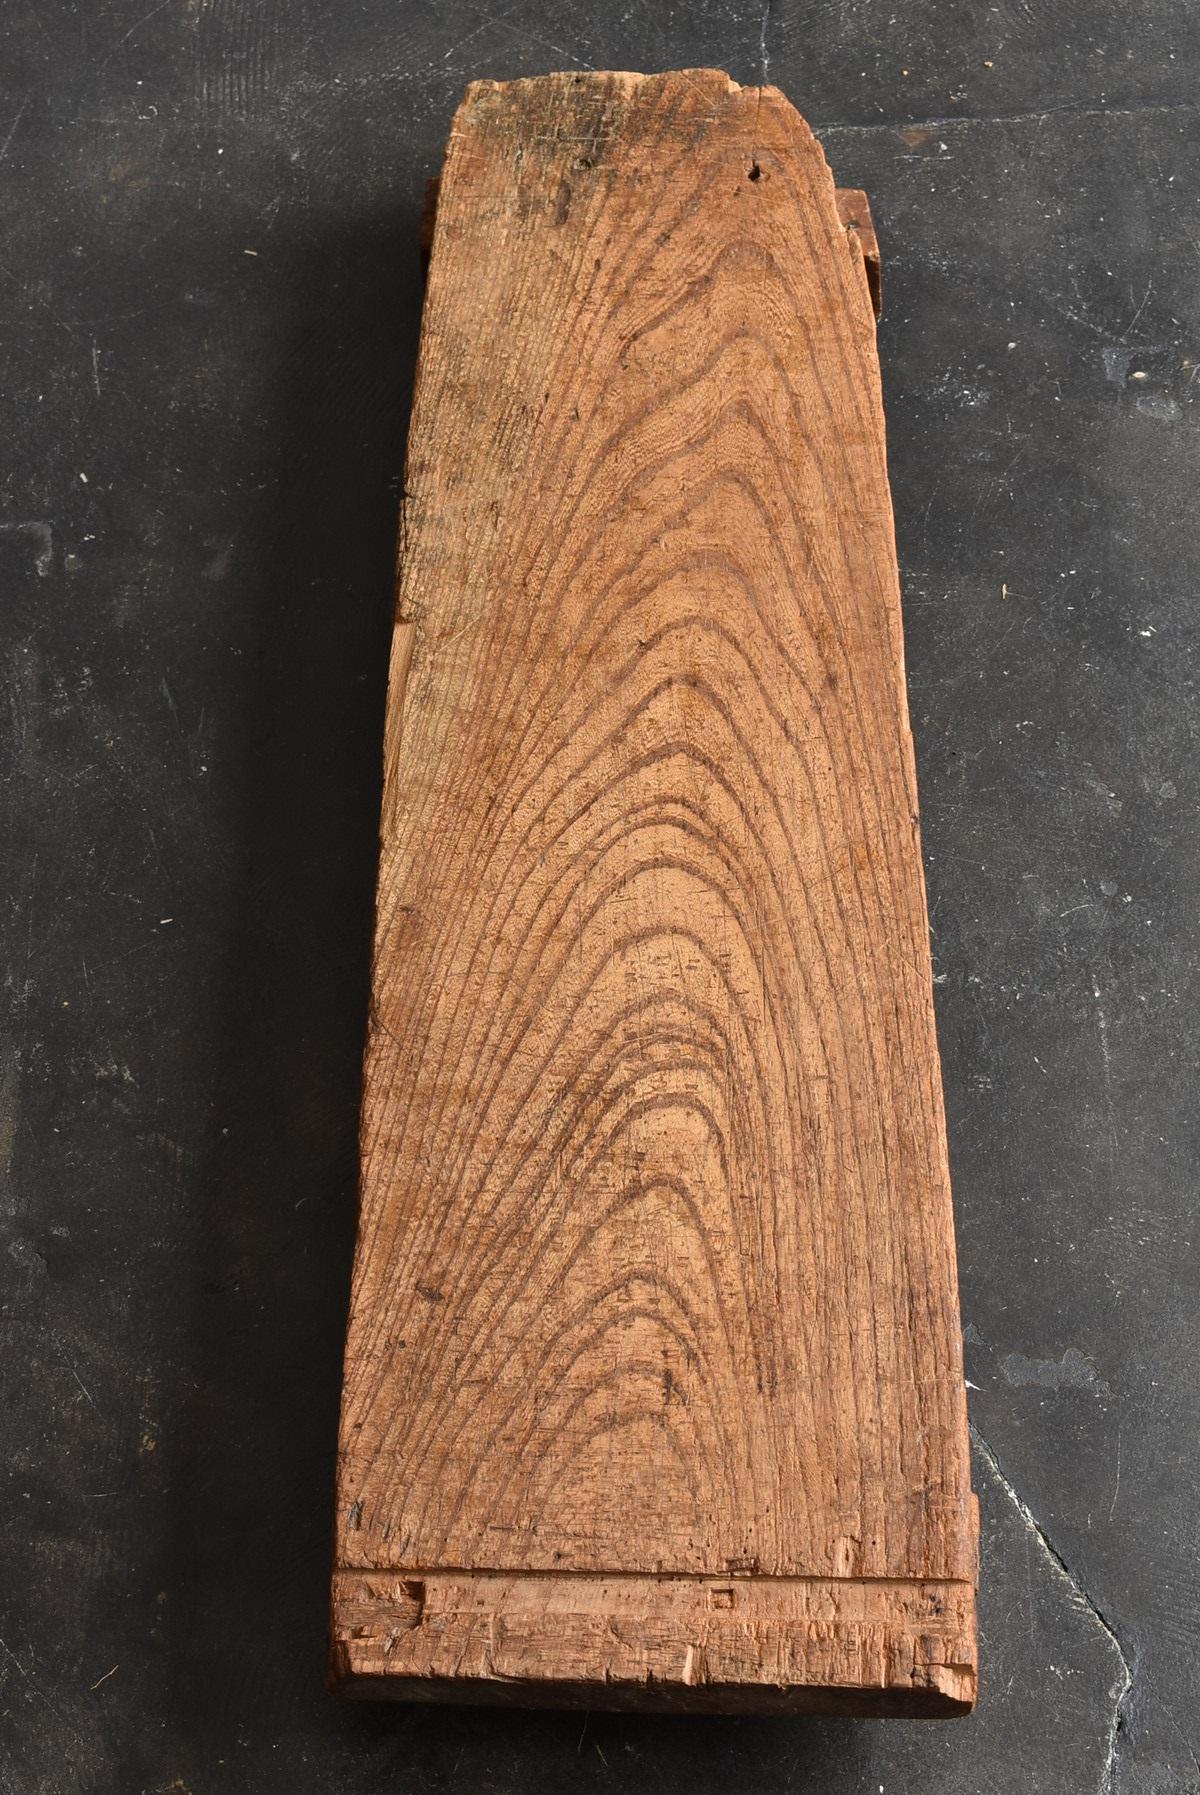 Keyaki (= Zelkova) is one of the finest woods in Japan.
This is hard and heavy wood.
Therefore, it is often used as a work table for craftsmen.
Probably a table for shaving wood with a plane.

It's not too big, so you can use it as a bench seat